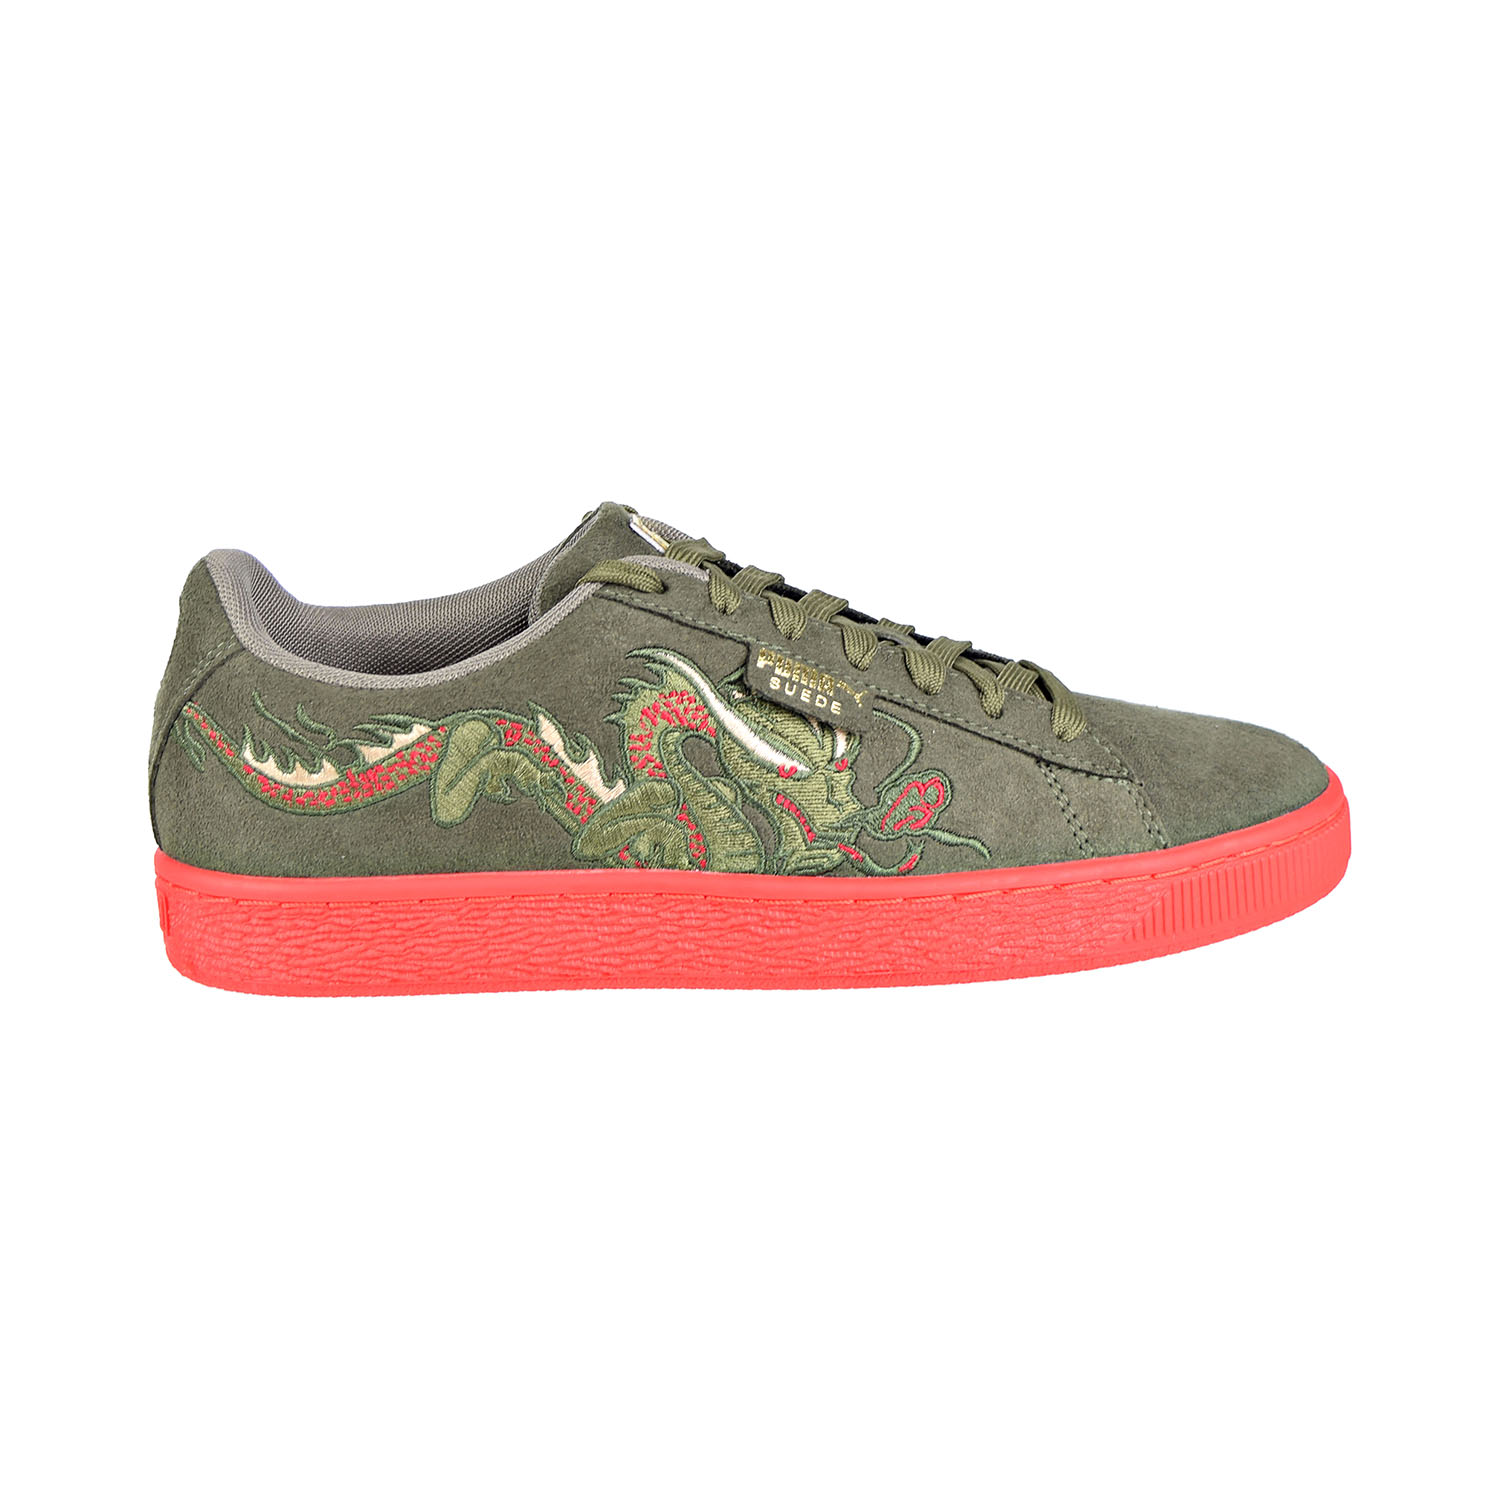 Puma Court Classic Dragon Patch Men's Shoes Burnt Olive/High Risk Red 368359-01 - image 1 of 6